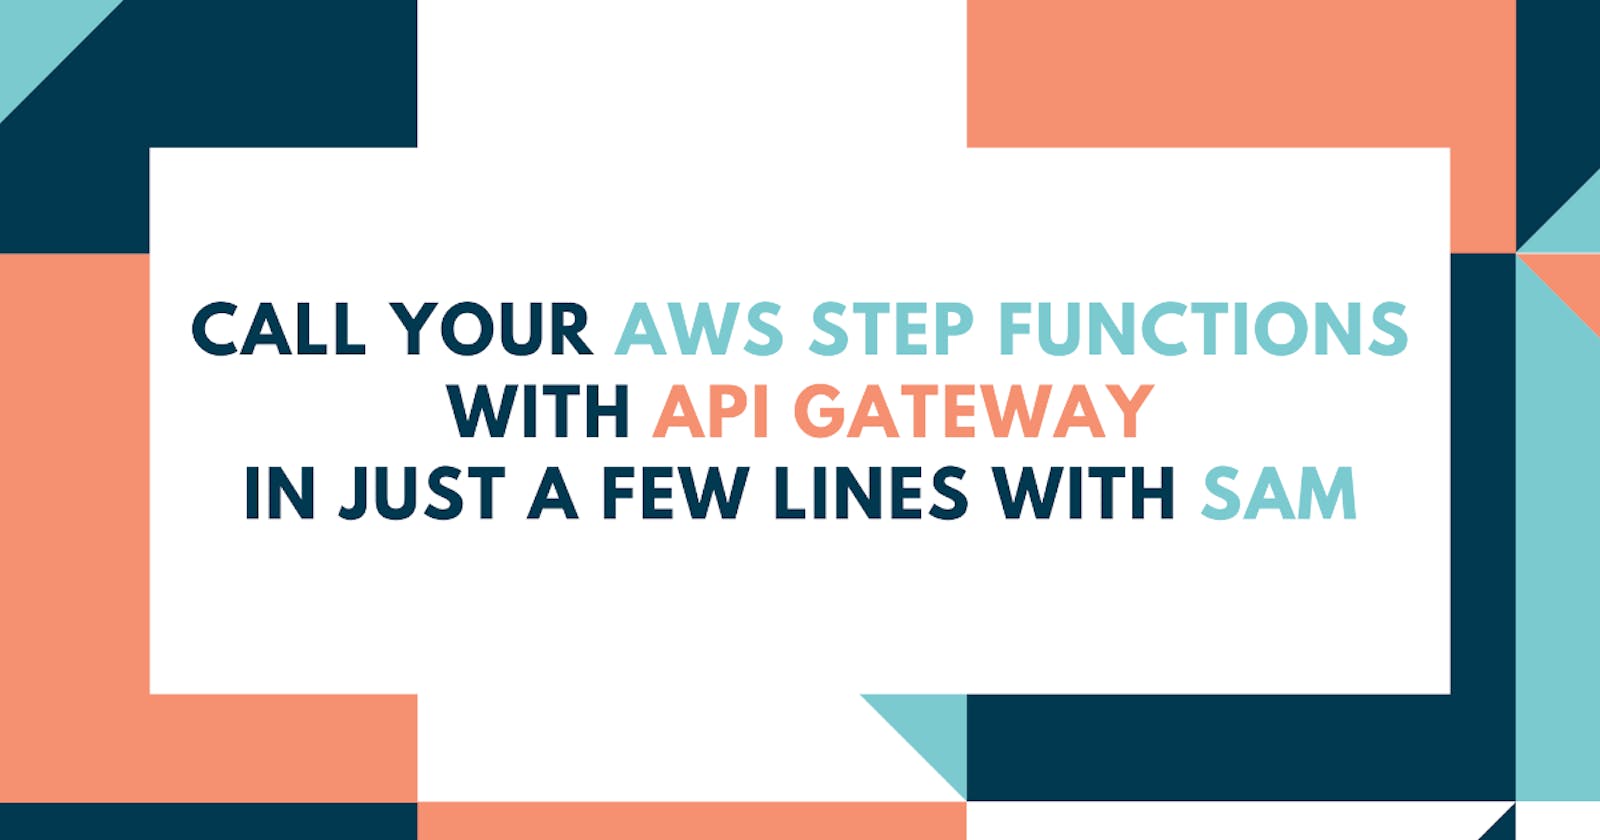 Call Your AWS Step Functions With API Gateway in Just a Few Lines With SAM